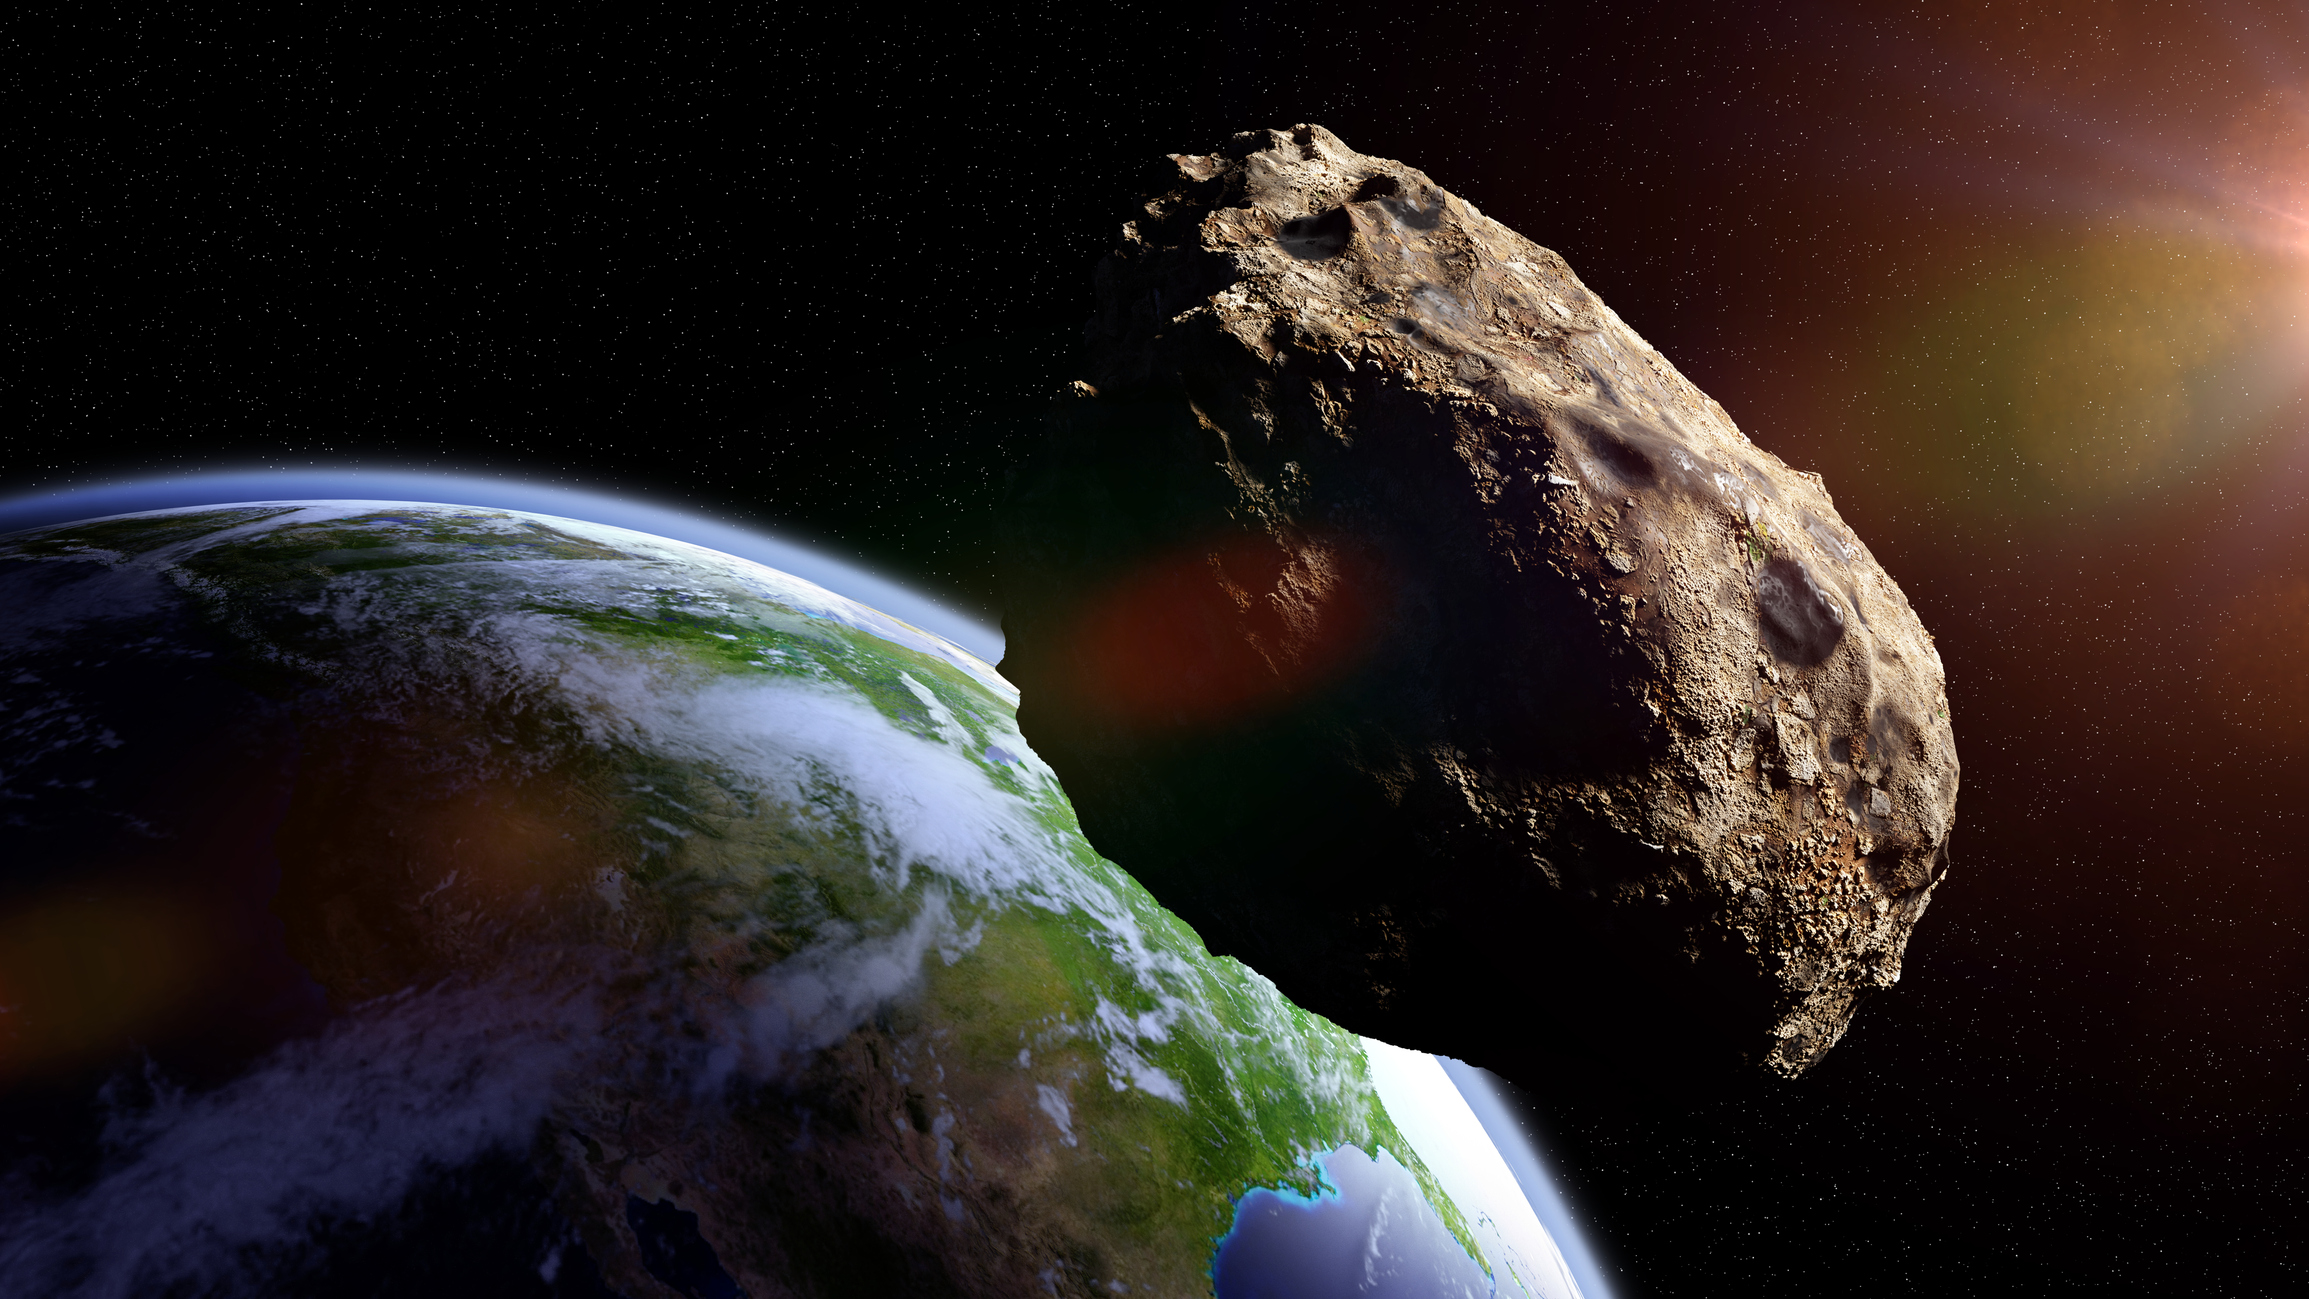 What Are Potentially Hazardous Asteroids and Is an Asteroid Predicted to Hit Earth?